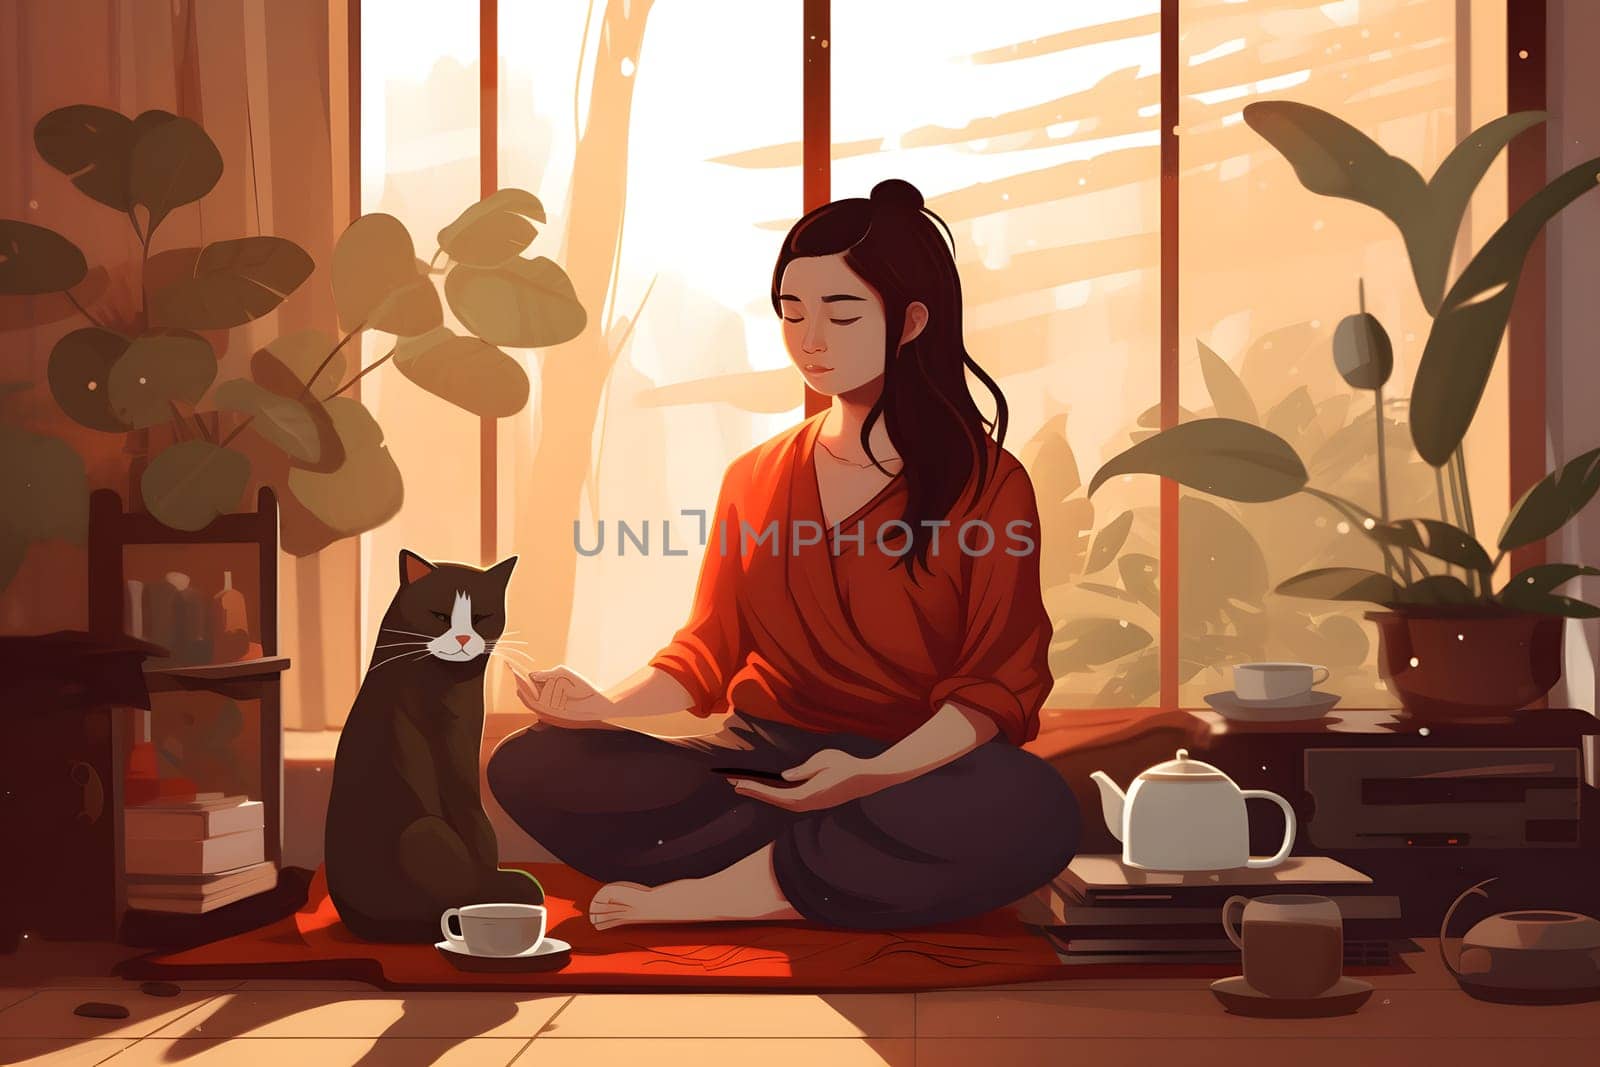 young adult asian woman sitting and meditating on the floor of domestic room with cat, neural network generated 2d style image by z1b